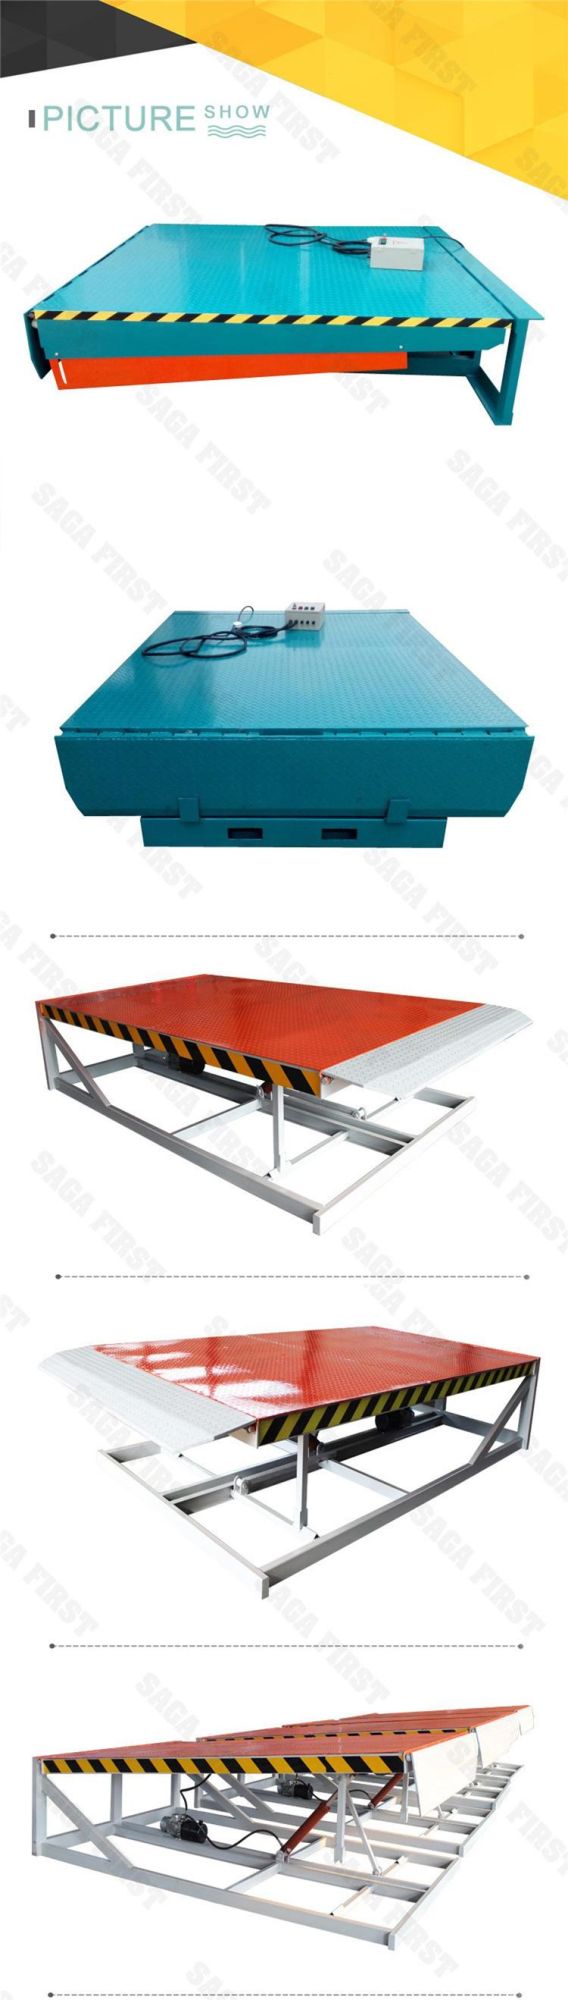 Stationary Manual Hydraulic Truck Loaded Container Dock Leveler